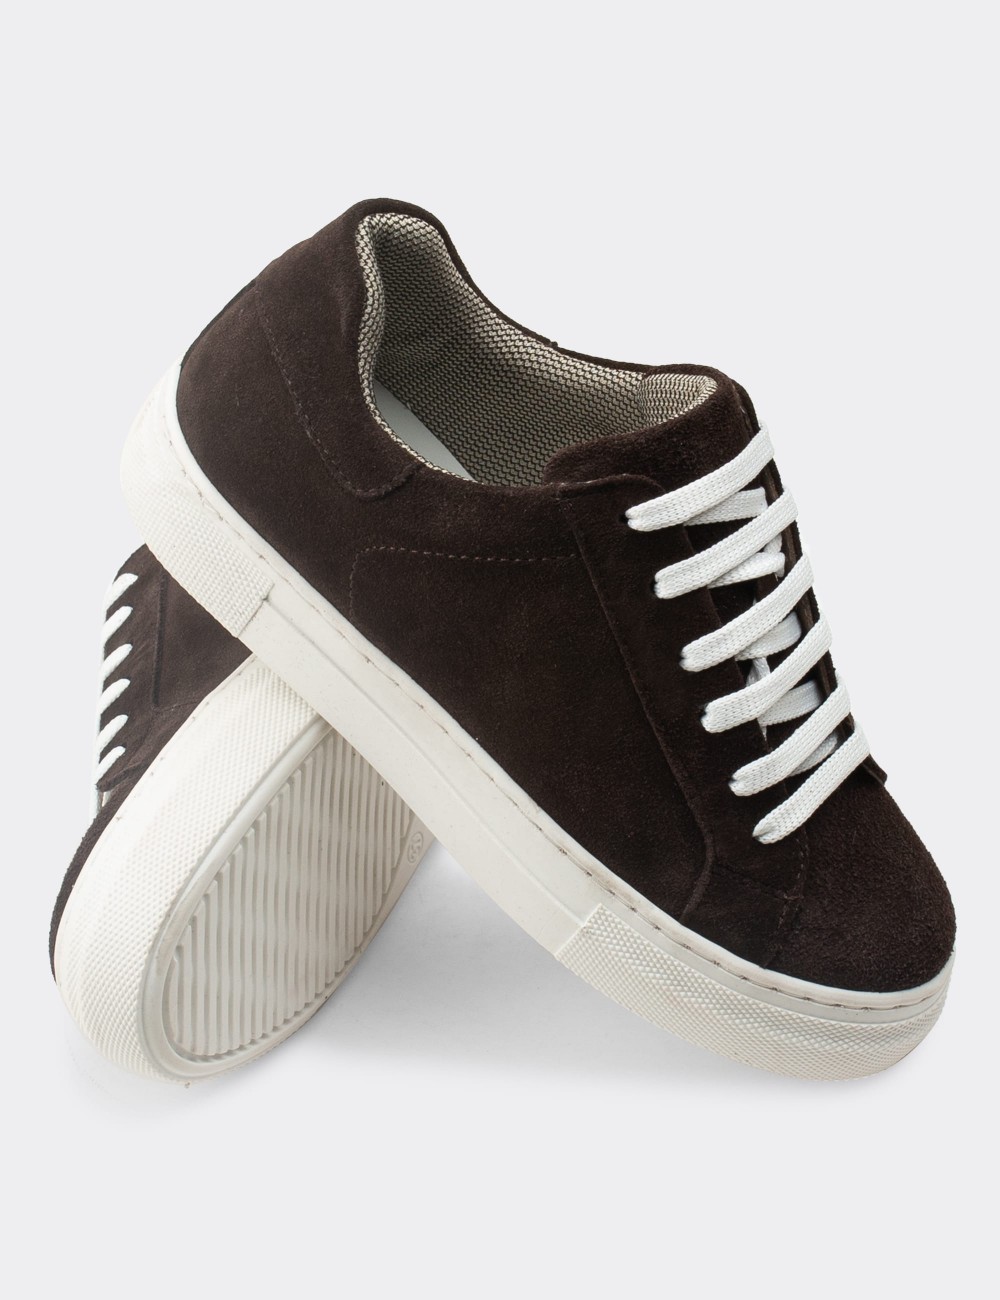 Brown Suede Leather Sneakers - Z1681ZKHVC01